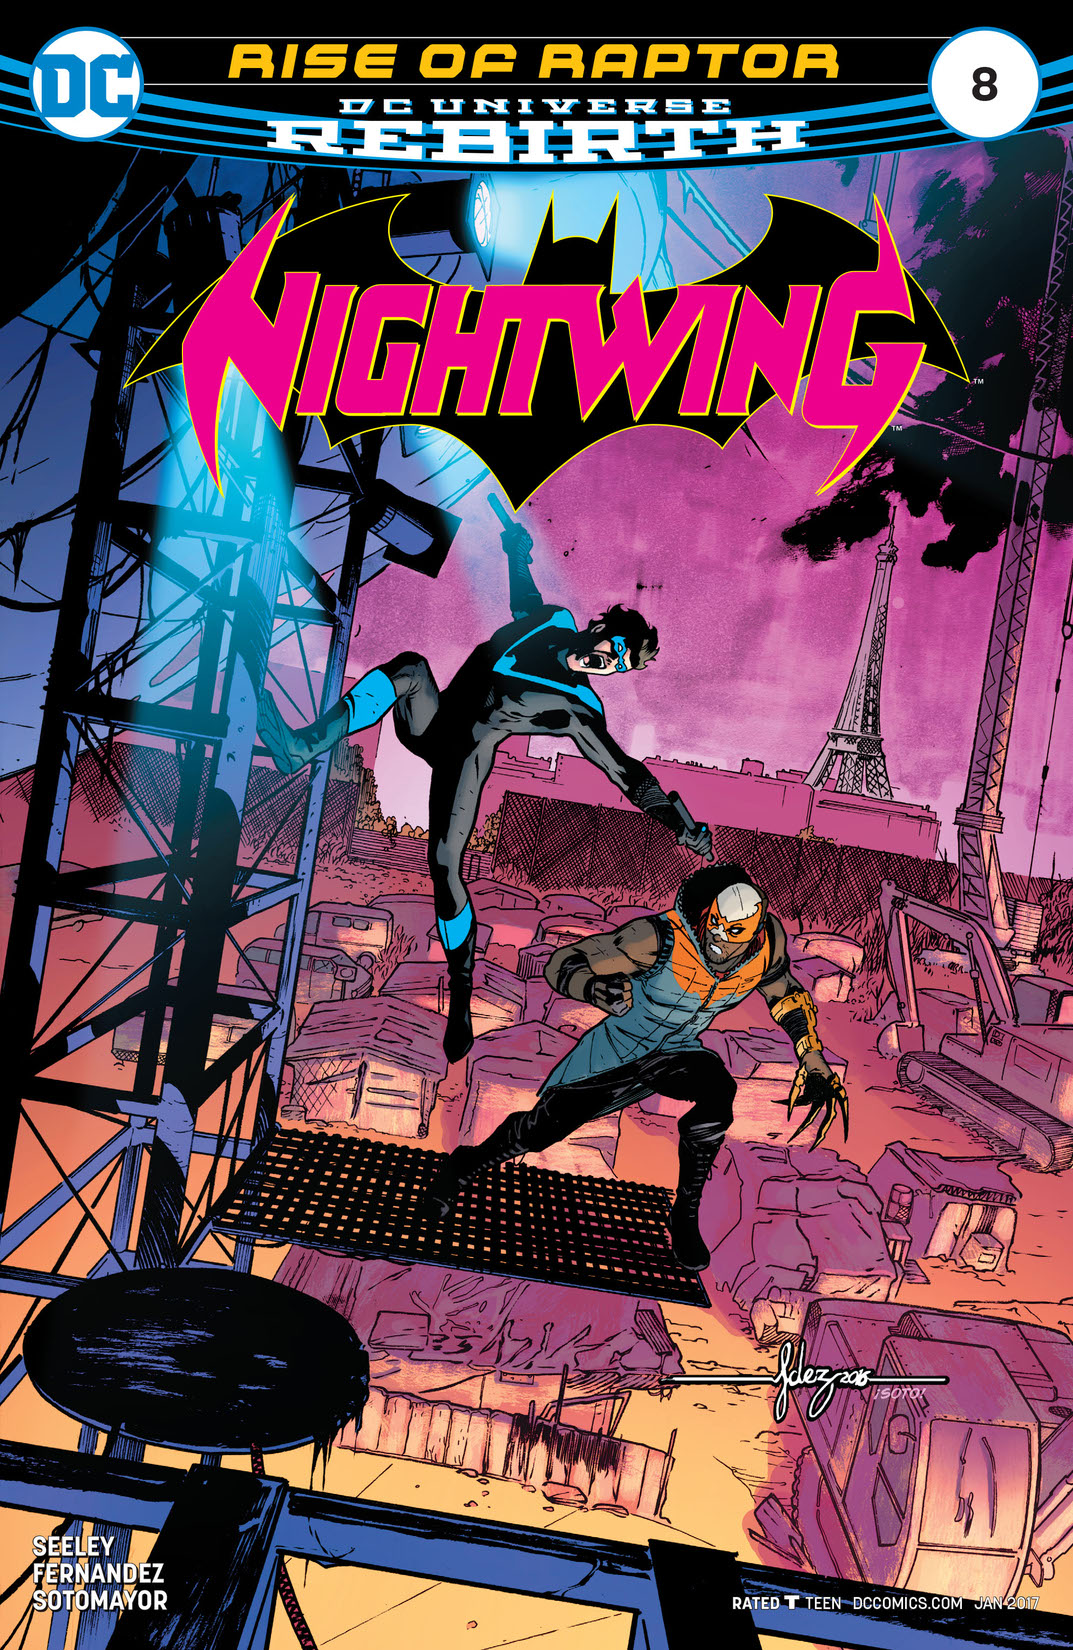 Nightwing (2016-) #8 preview images